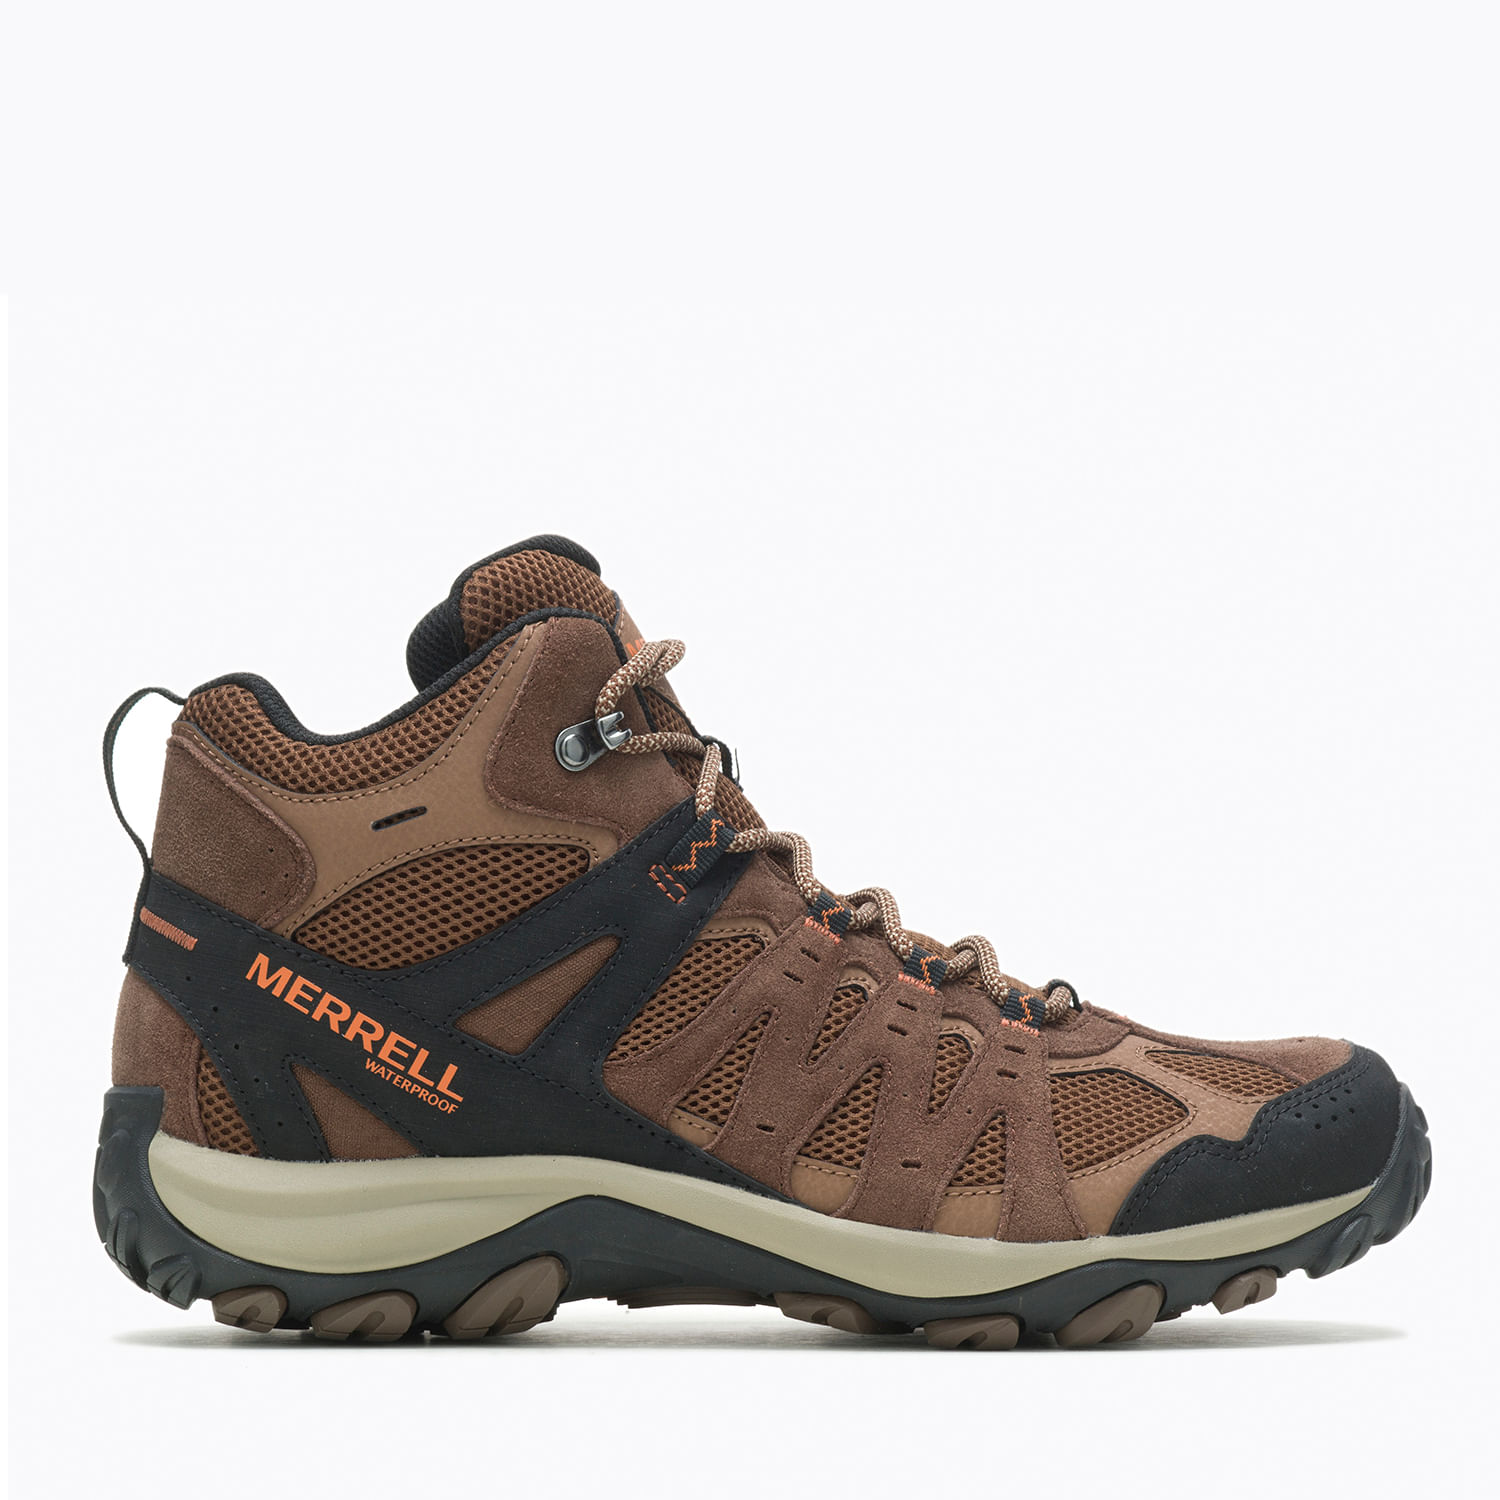 Botin Hombre Accentor 3 Mid Waterproof-Merrell Chile 